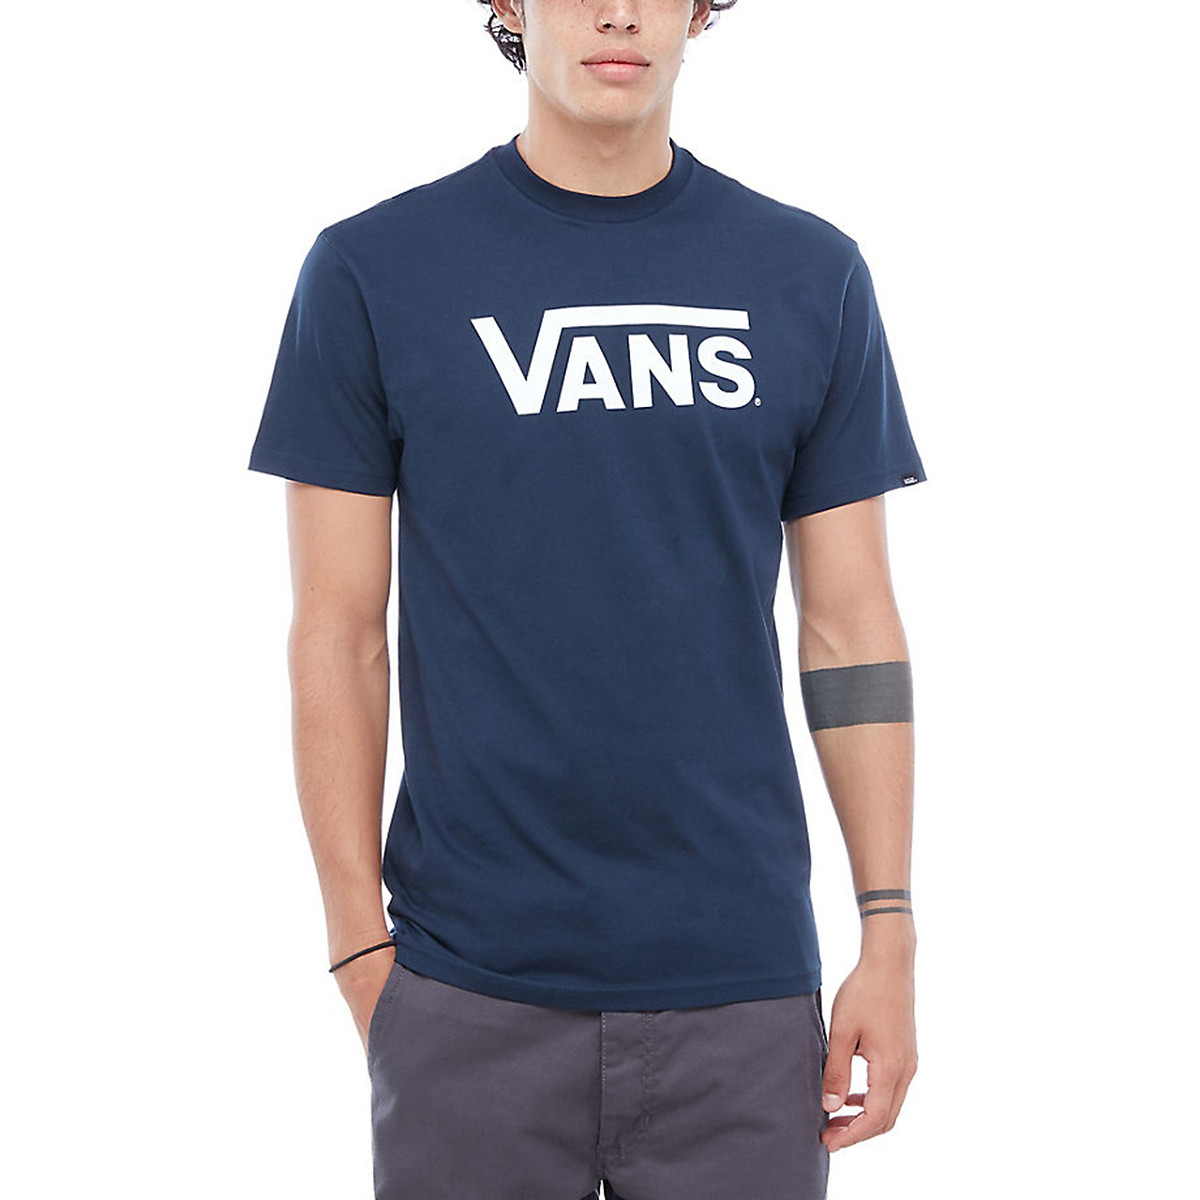 Short-Sleeved Crew Neck T-Shirt with Printed Logo